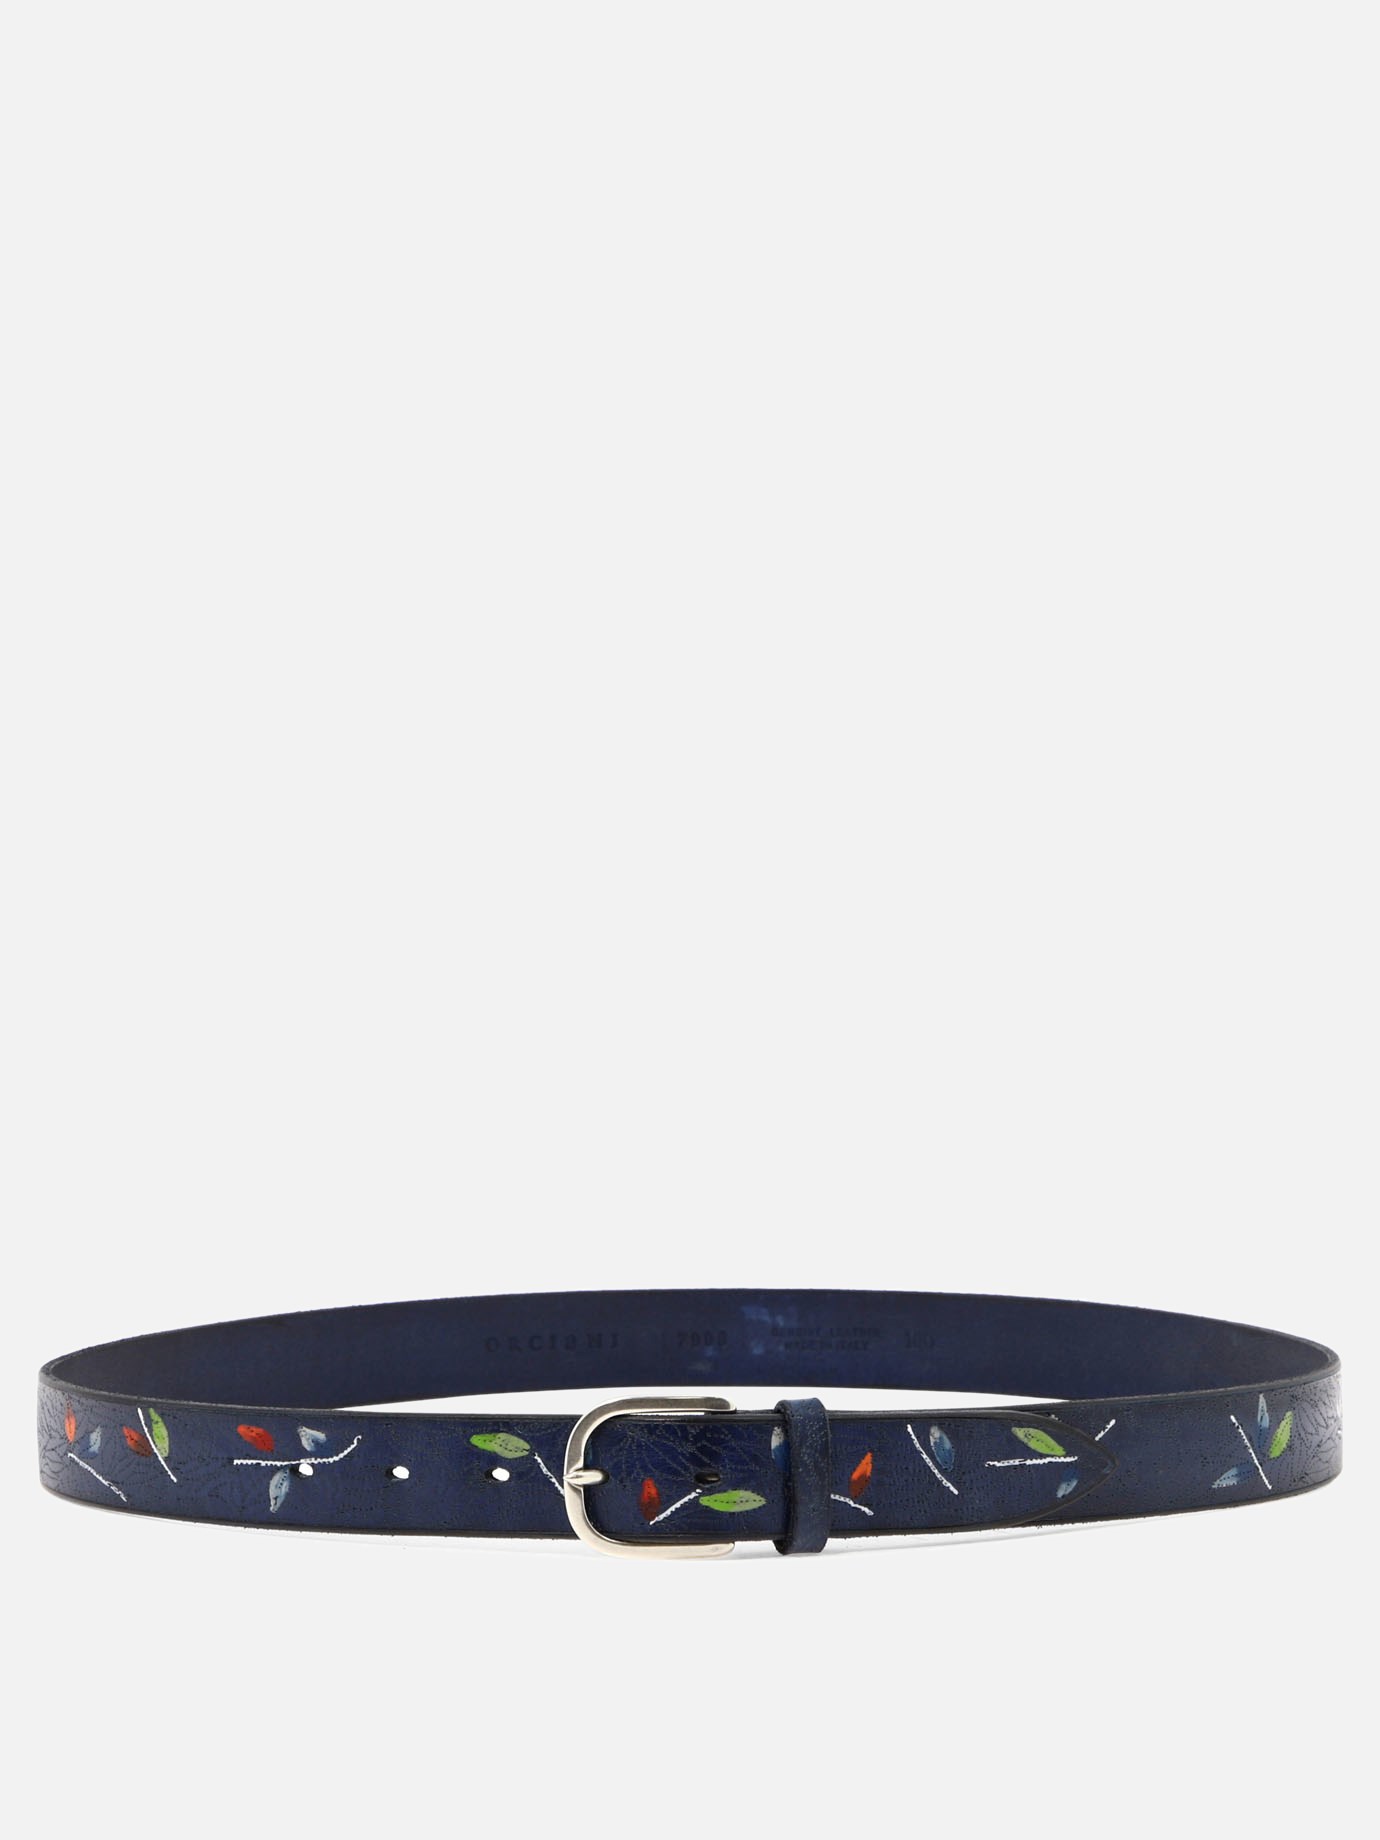  Bamboo  beltby Orciani - 0